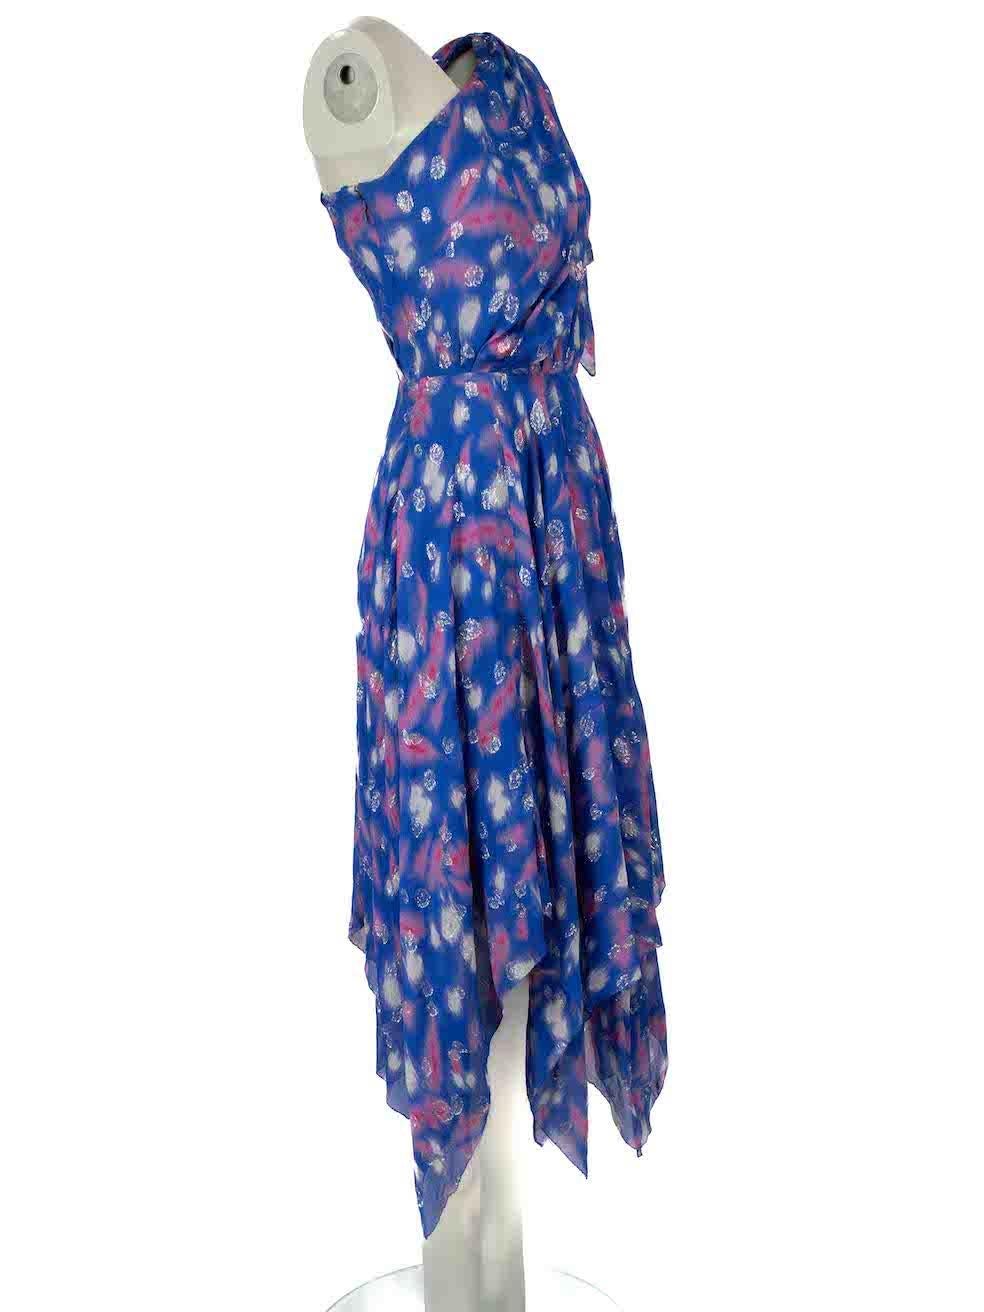 CONDITION is Very good. Minimal wear to dress is evident. Minimal stains to centre front of skirt on this used Isabel Marant designer resale item.

Details
Blue
Silk
Midi dress
Abstract pattern
One shoulder
Sheer layer
Side zip closure with hook and